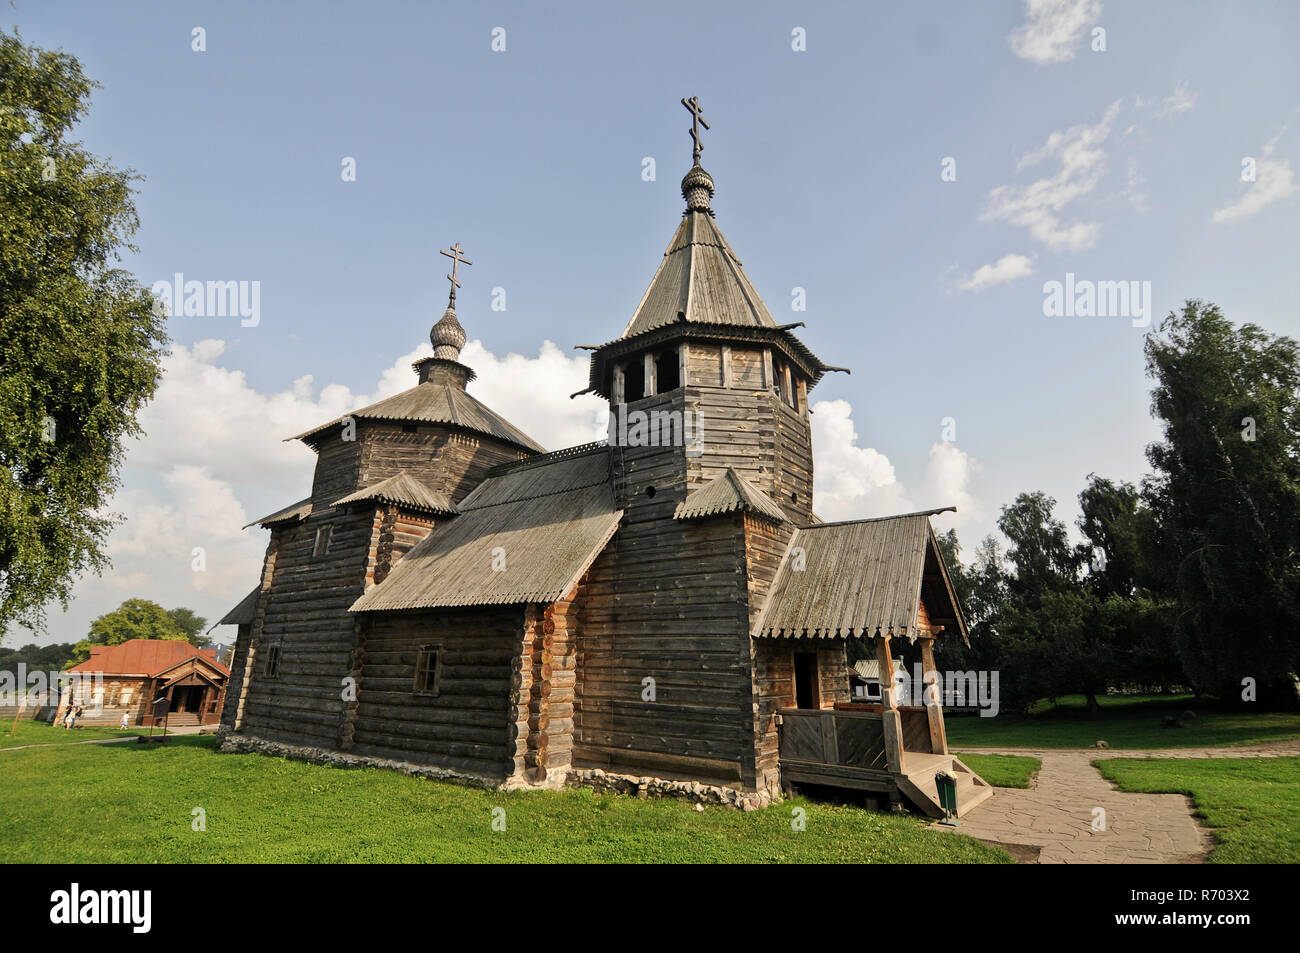 Museum of Wooden Architecture and Peasant Life - Ancient wooden church. Suzdal, Russia Stock Photo